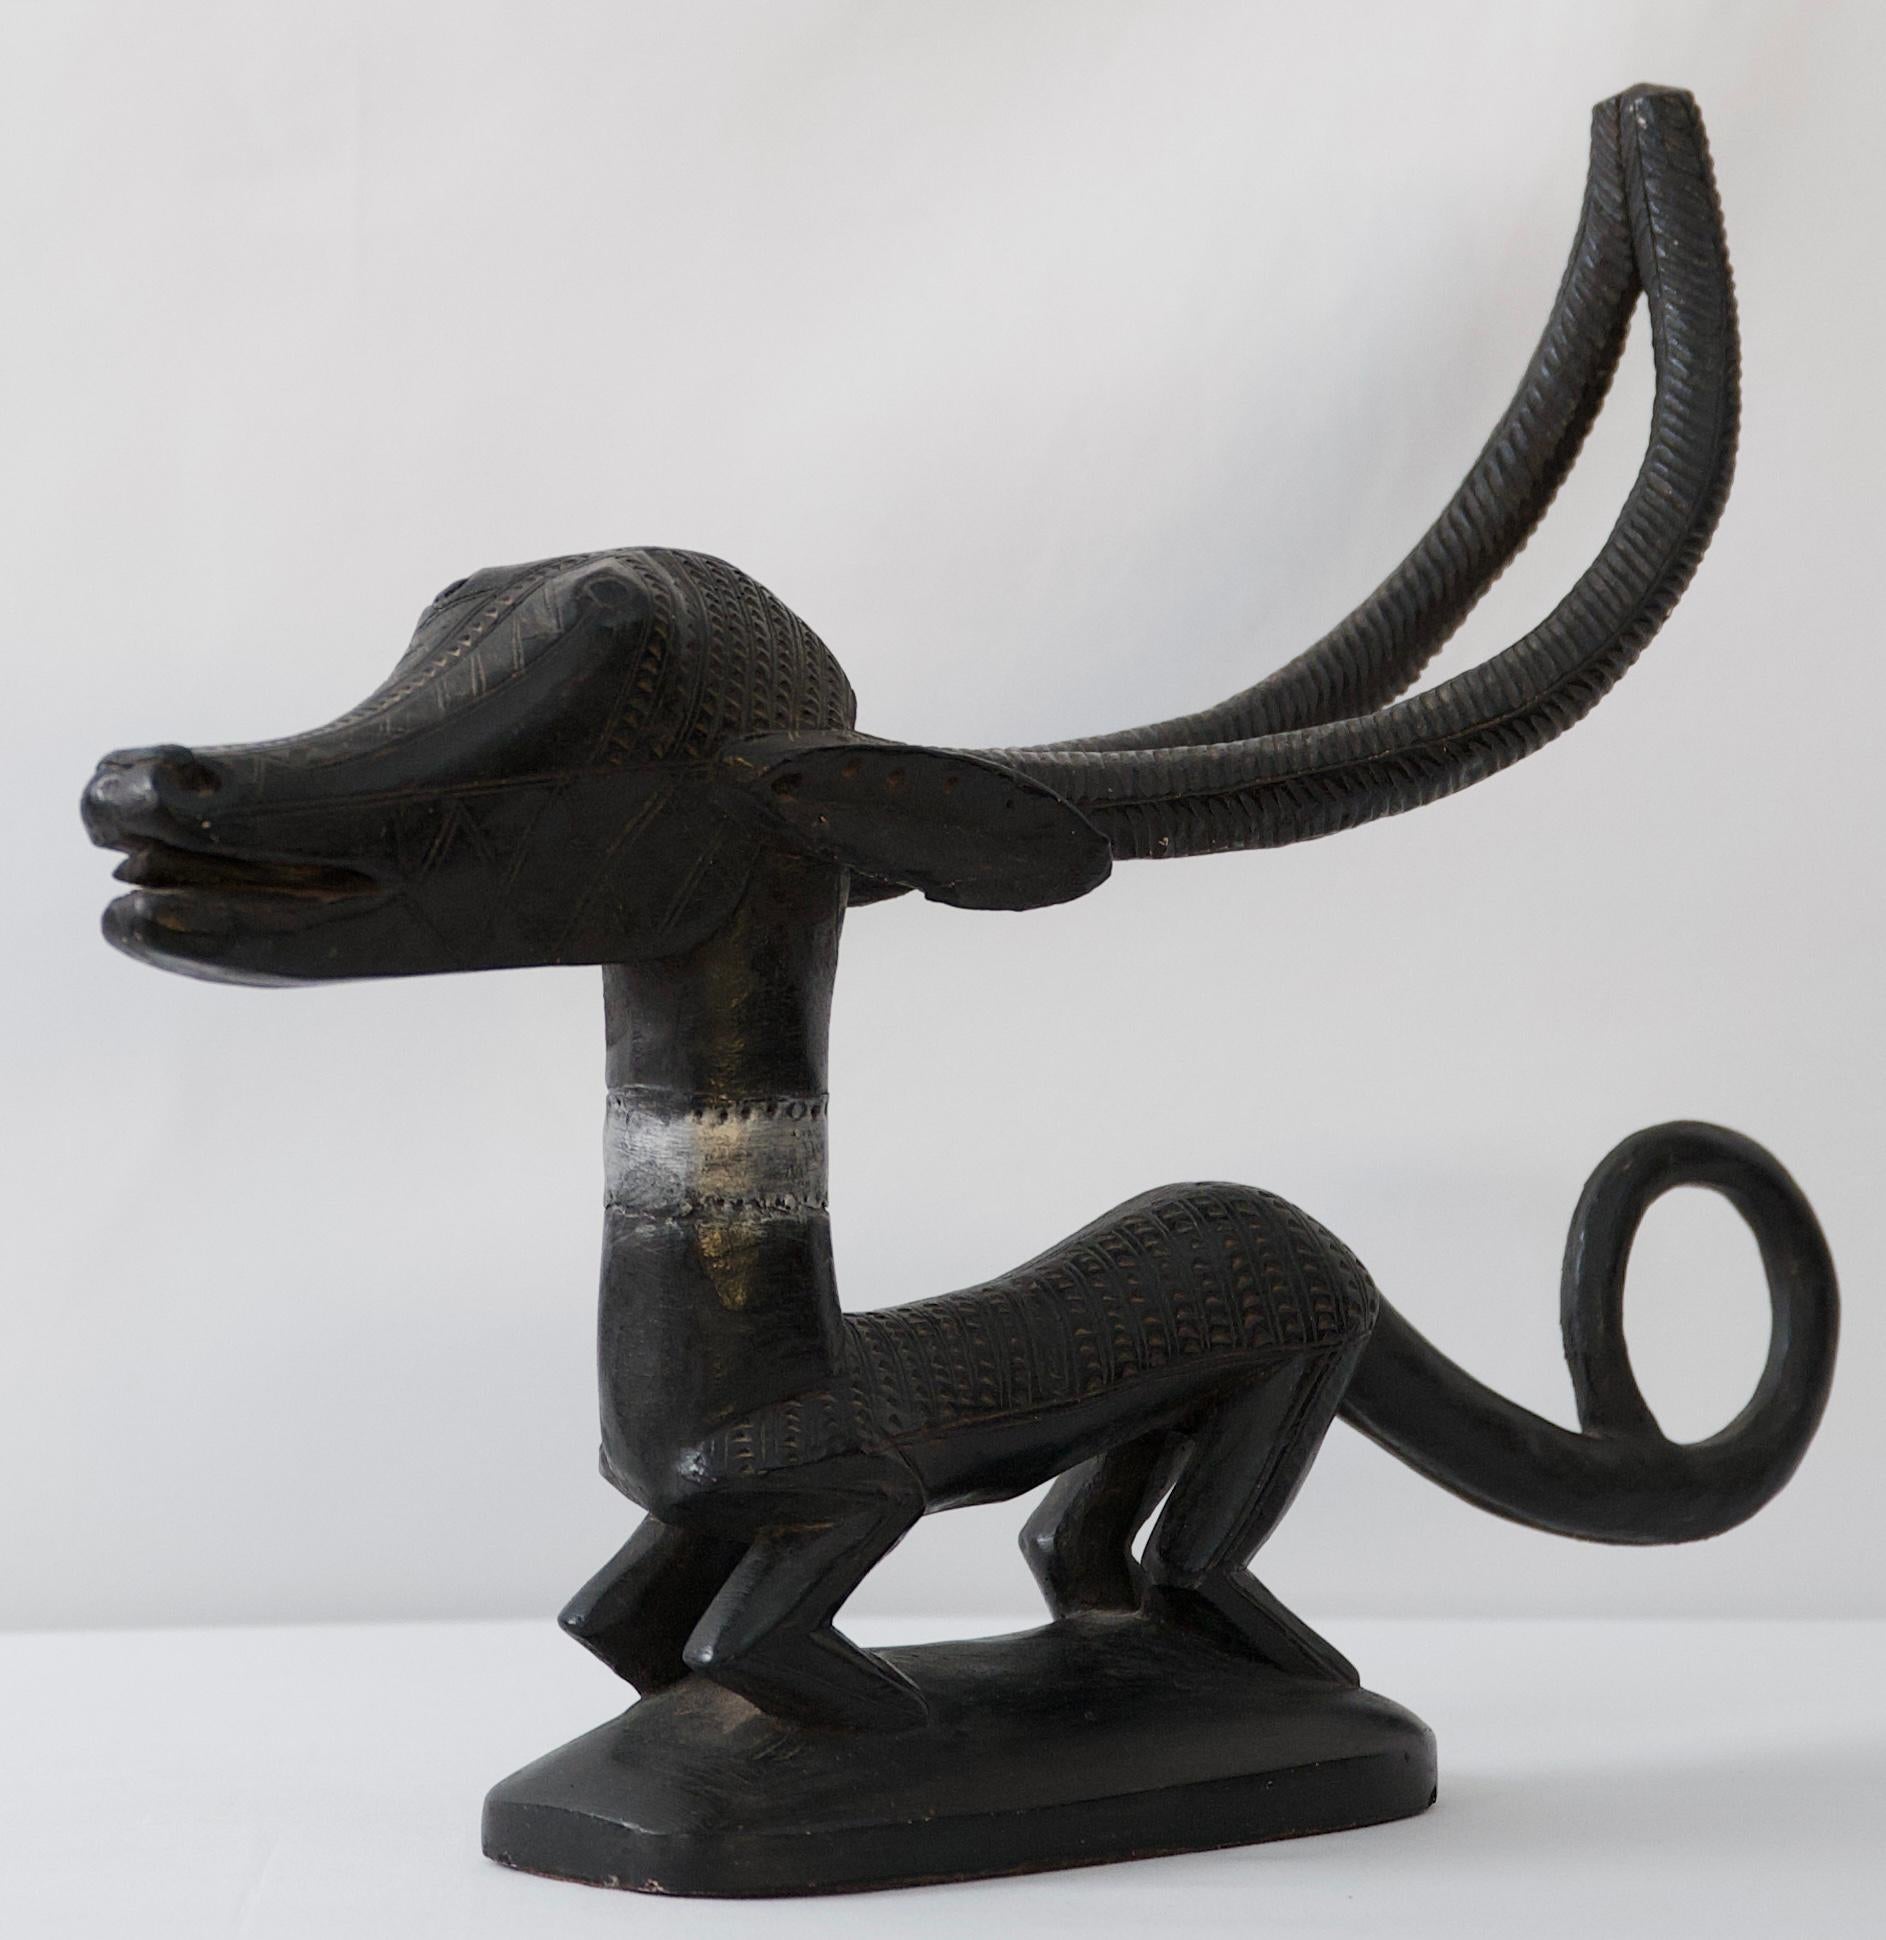 A whimsical depiction of an African mythical dog sculpted by and artist for Austin Productions. 

This eye-catching decorative animal sculpture is made of stone and plaster mix. Would enhance any setting. 

Measures: 20 1/2